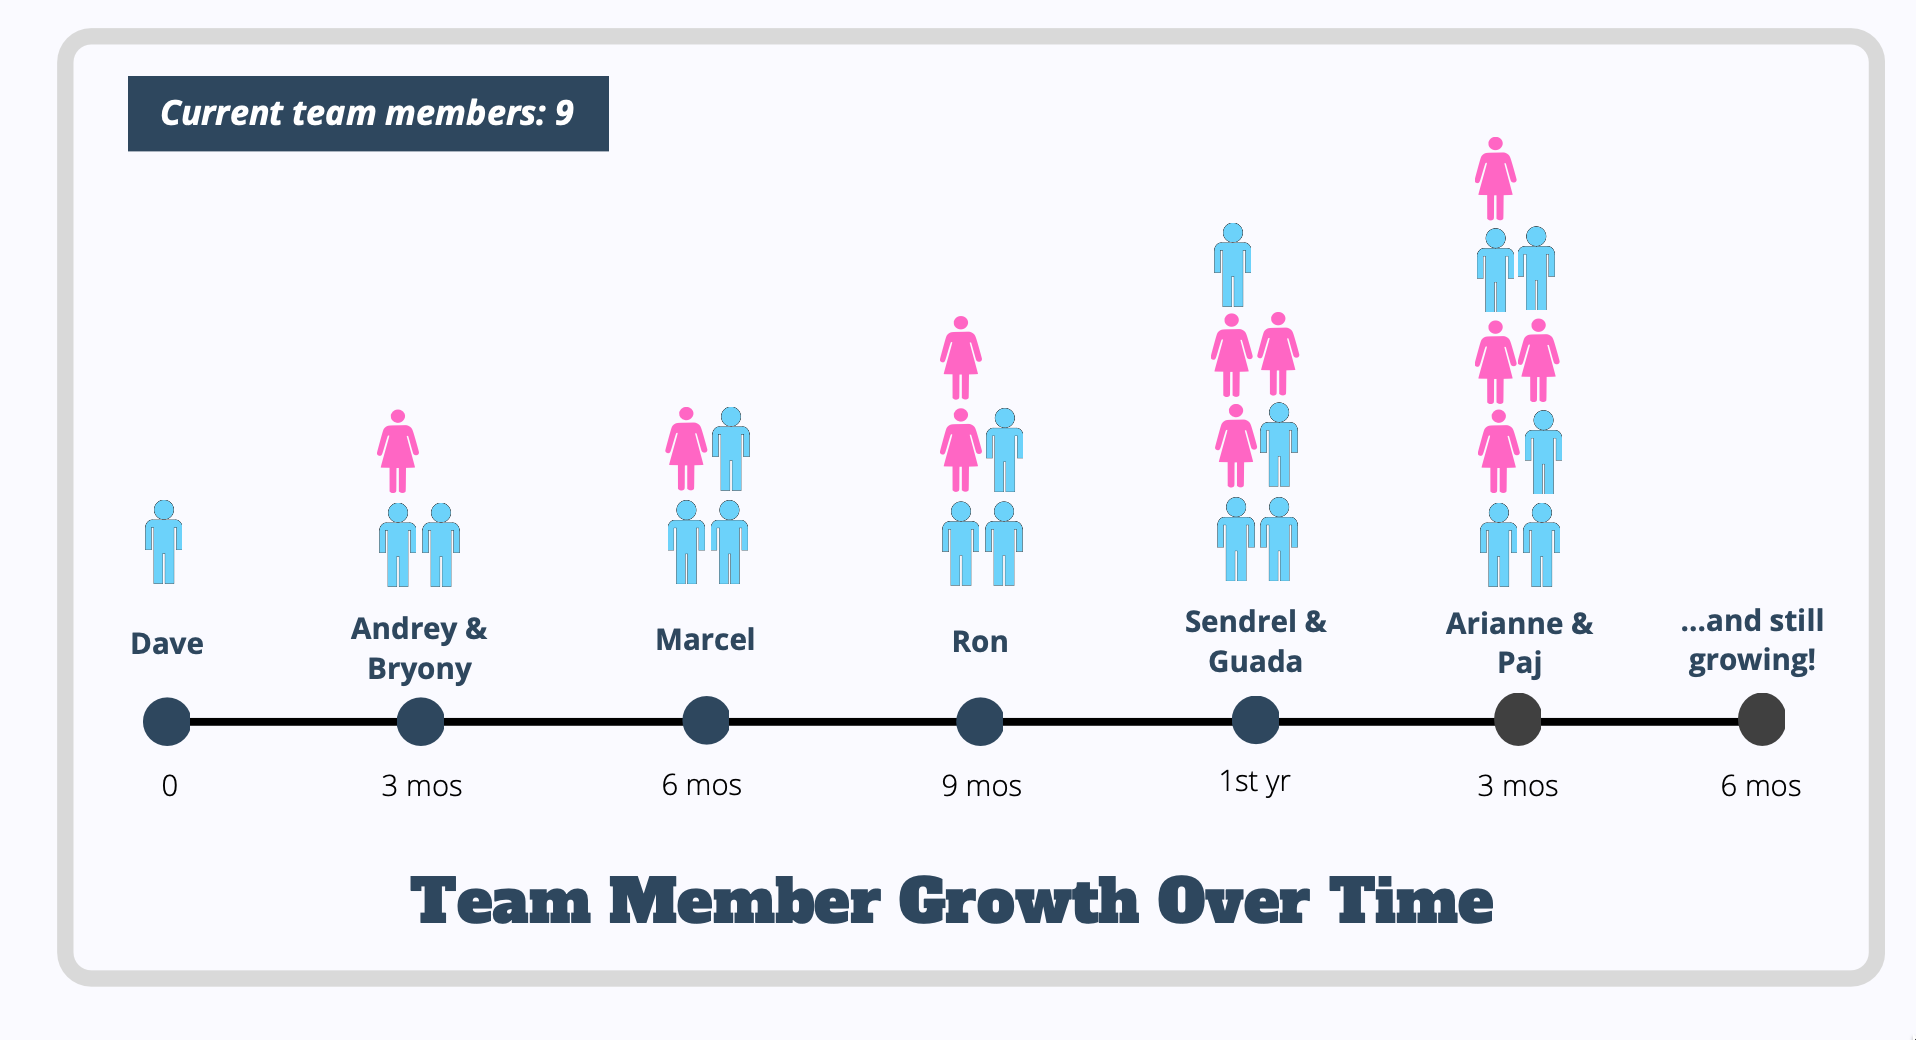 ImportYeti's Team Member Growth Over Time